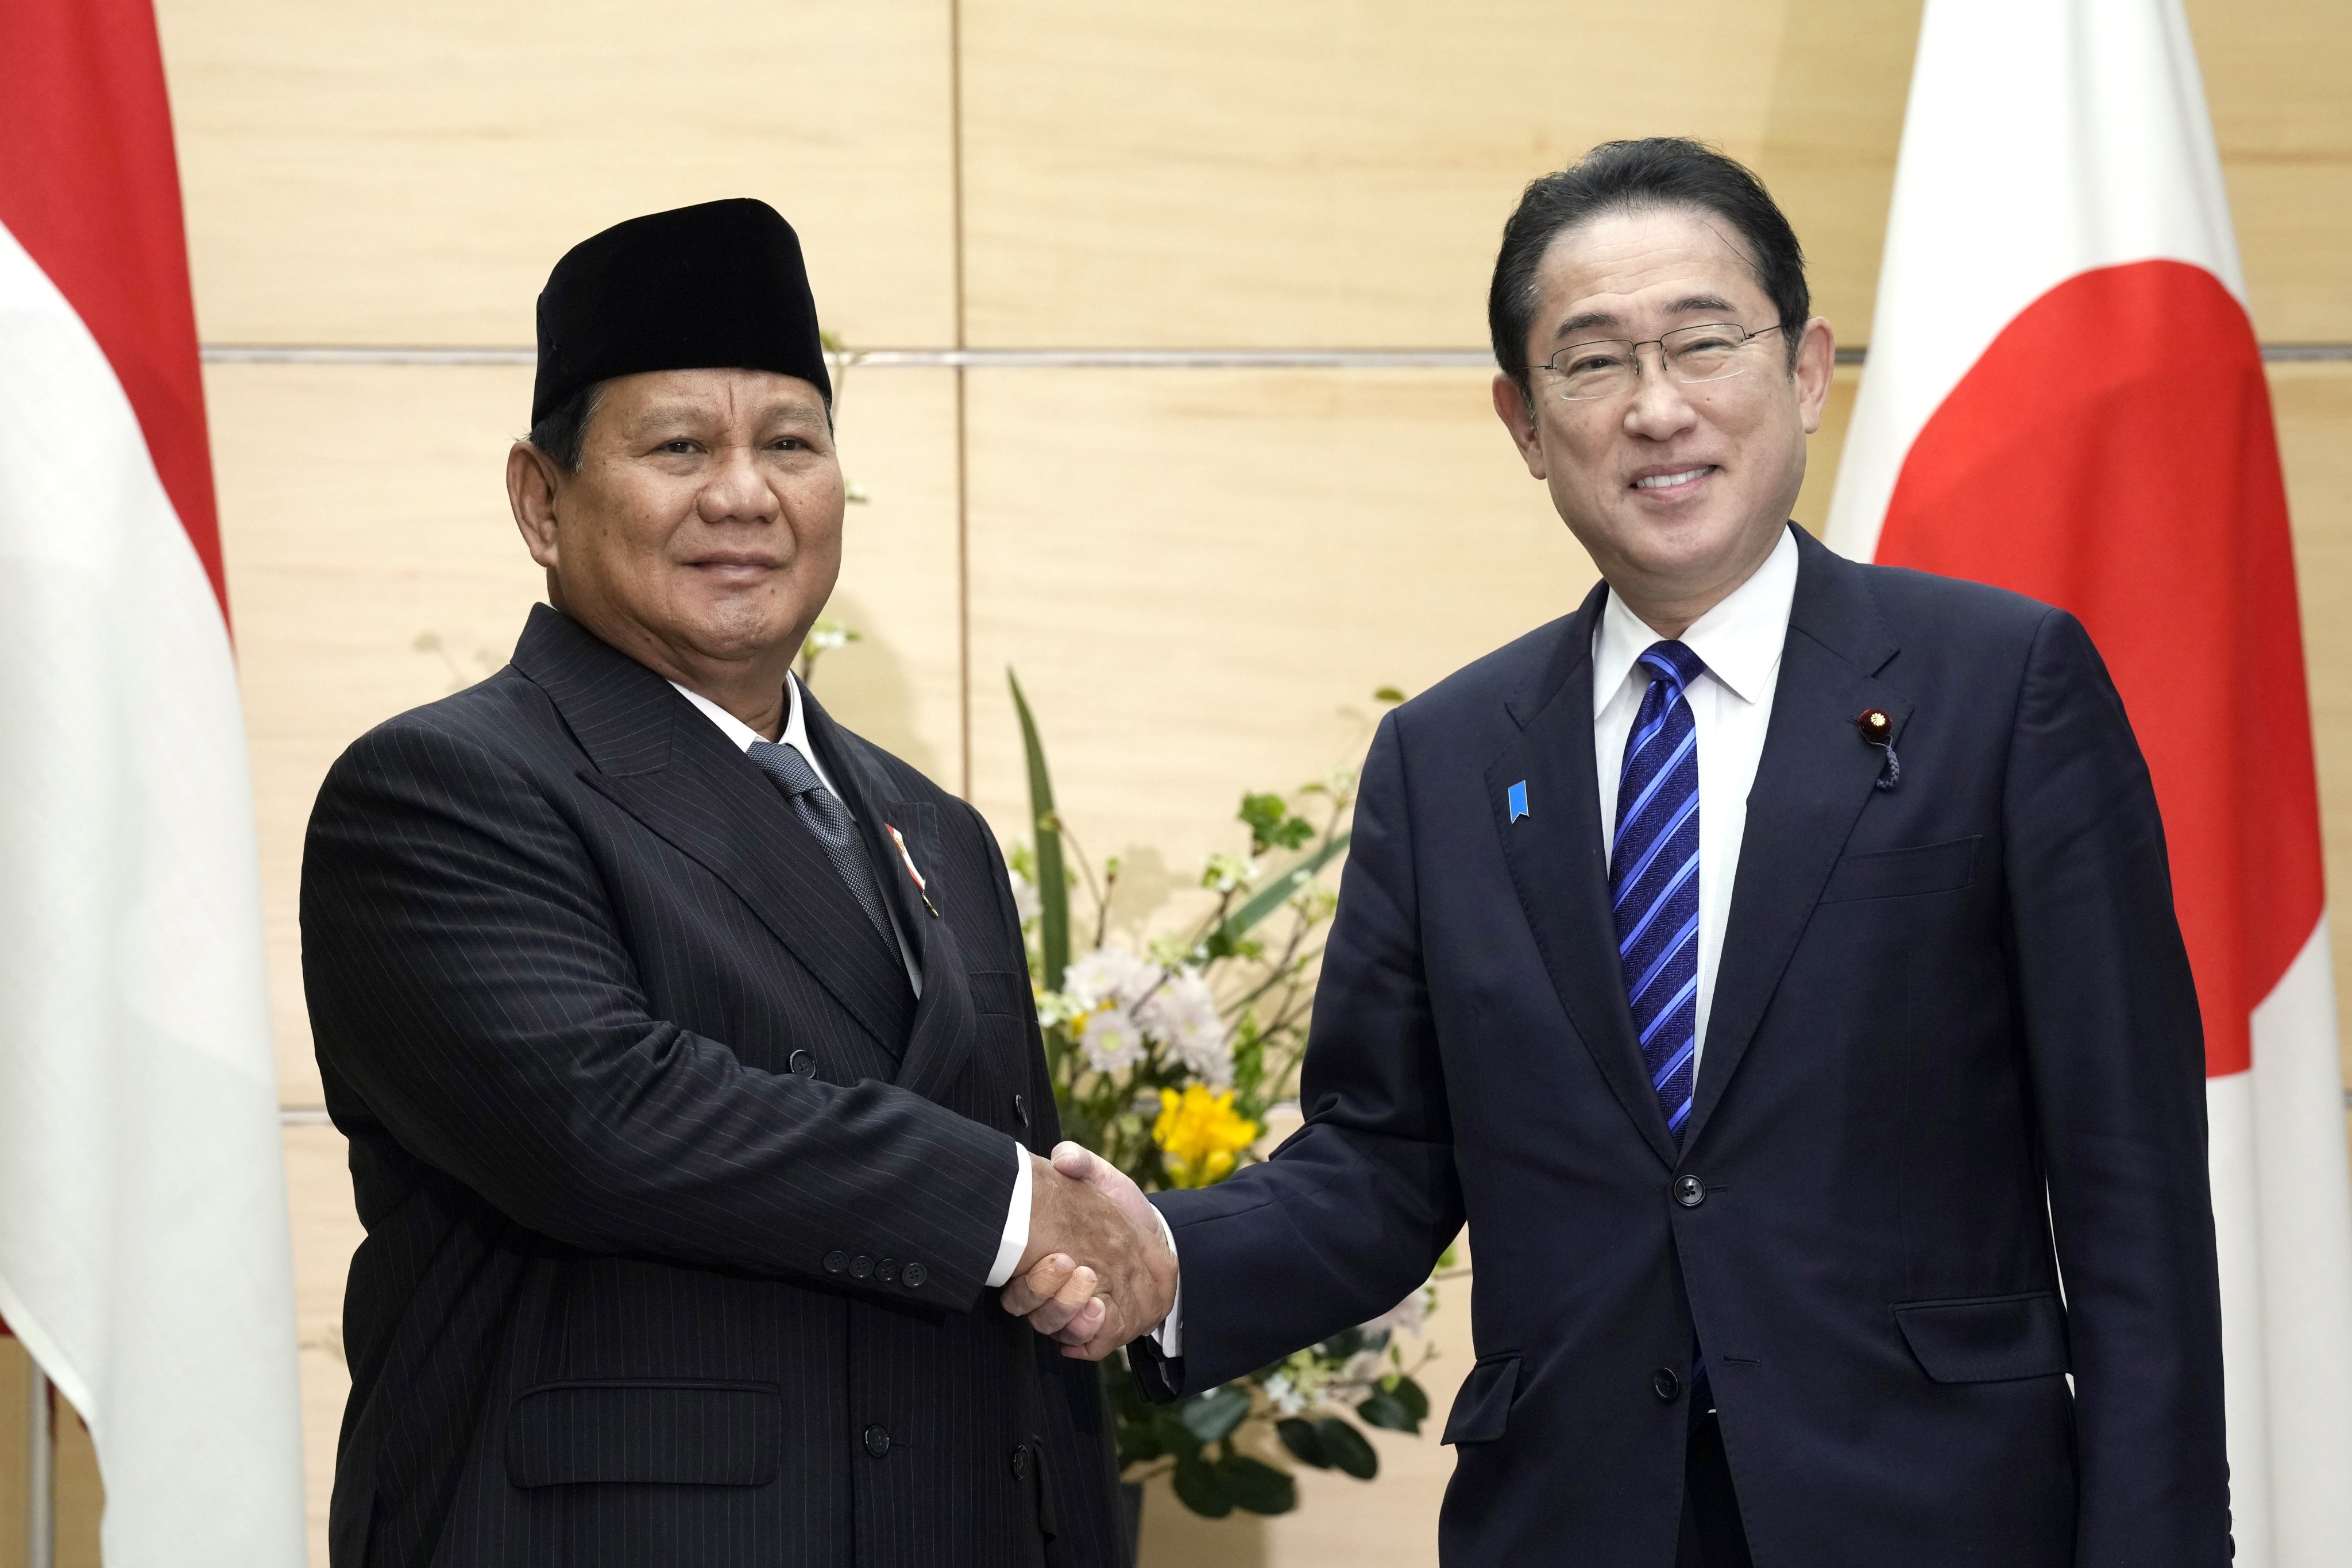 Indonesian president-elect and current defence minister Prabowo Subianto (left) and Japan’s Prime Minister Fumio Kishida shake hands at the prime minister’s office in Tokyo, Japan, on Wednesday. Photo: EPA-EFE